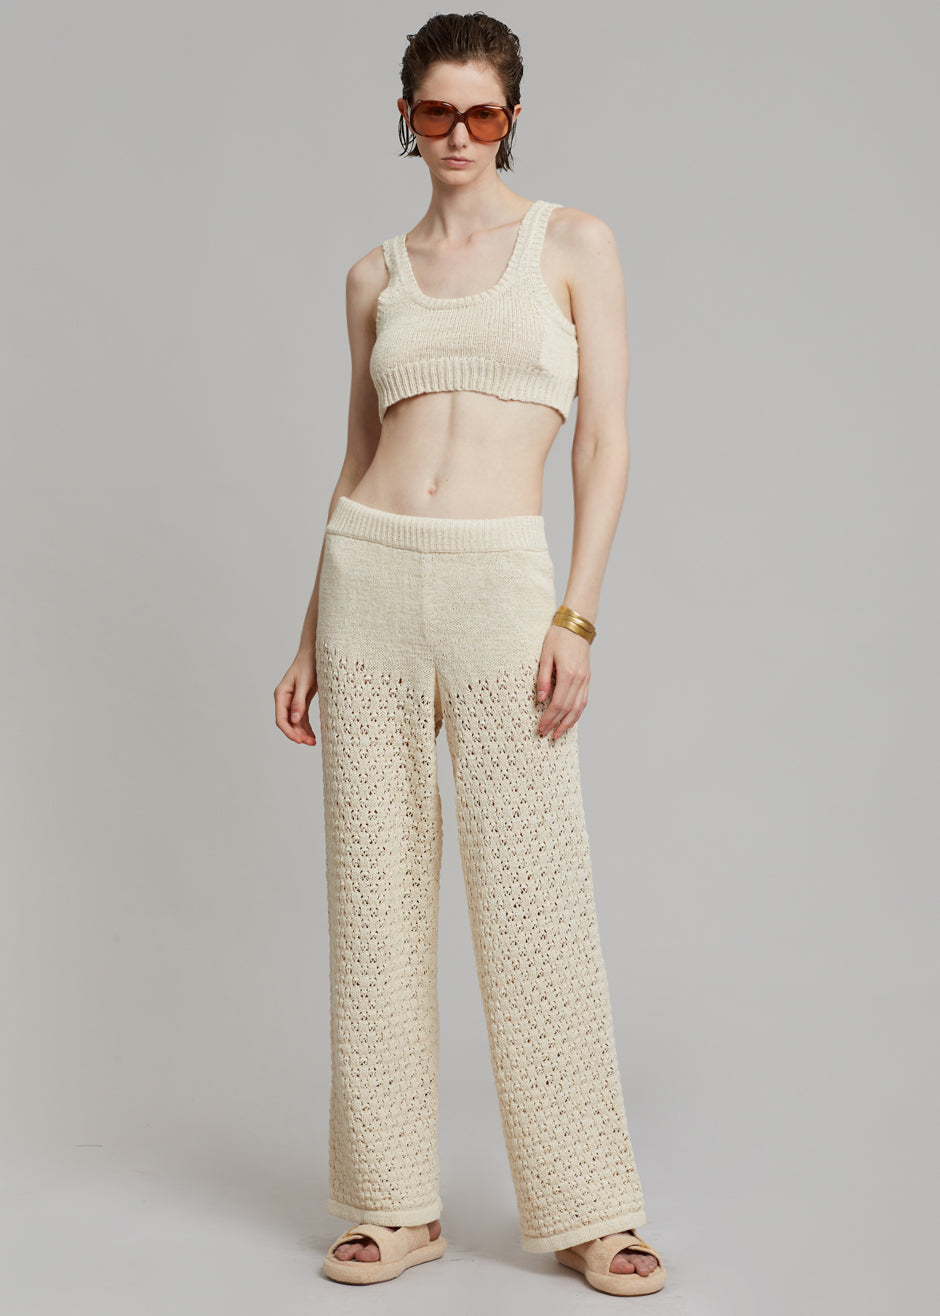 ROTATE Birdy Knit Top - White Asparagus